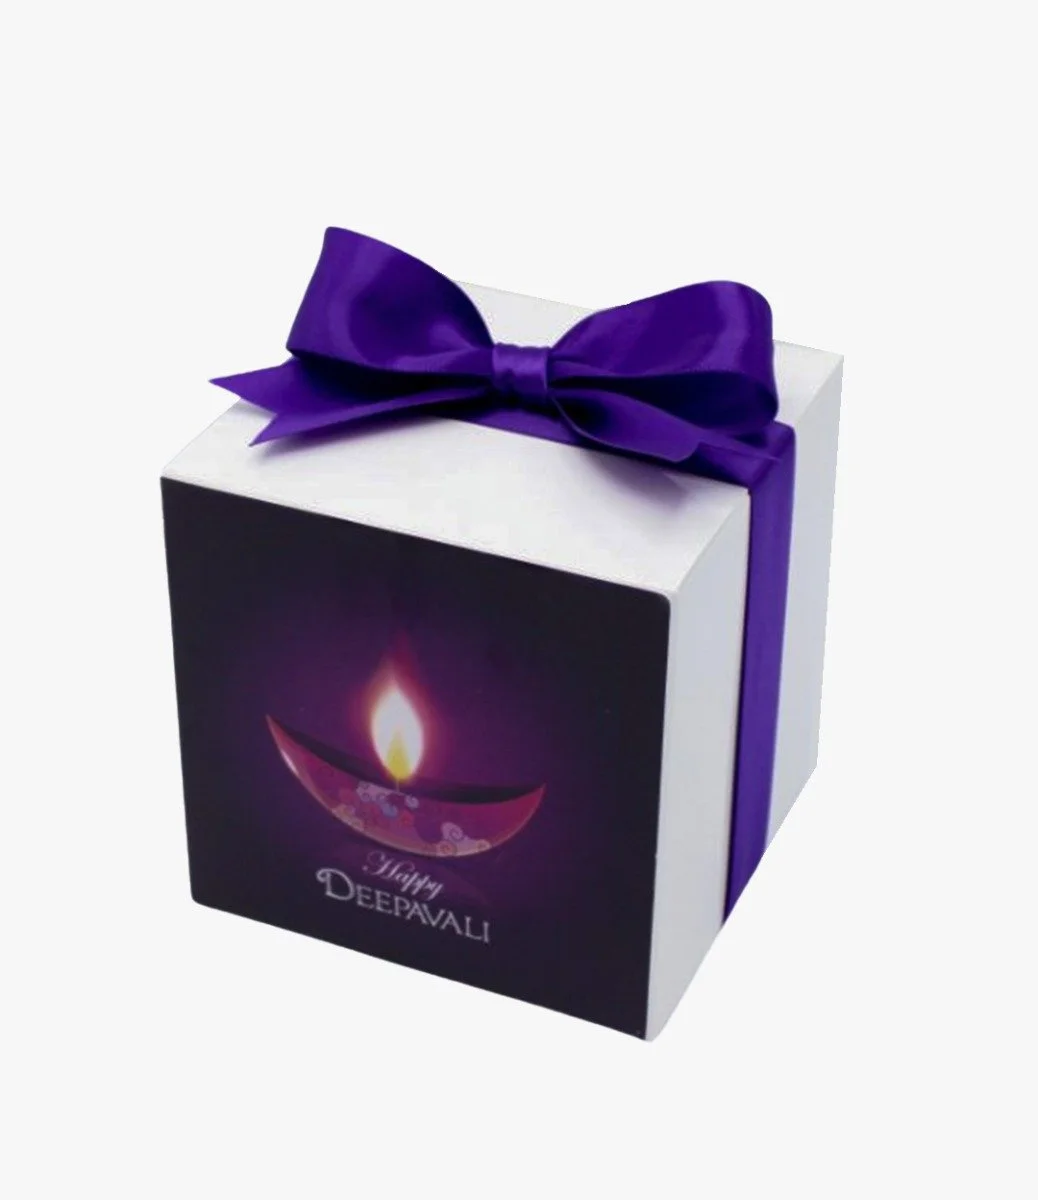 Diwali Candle Designed Chocolate Box by Le Chocolatier